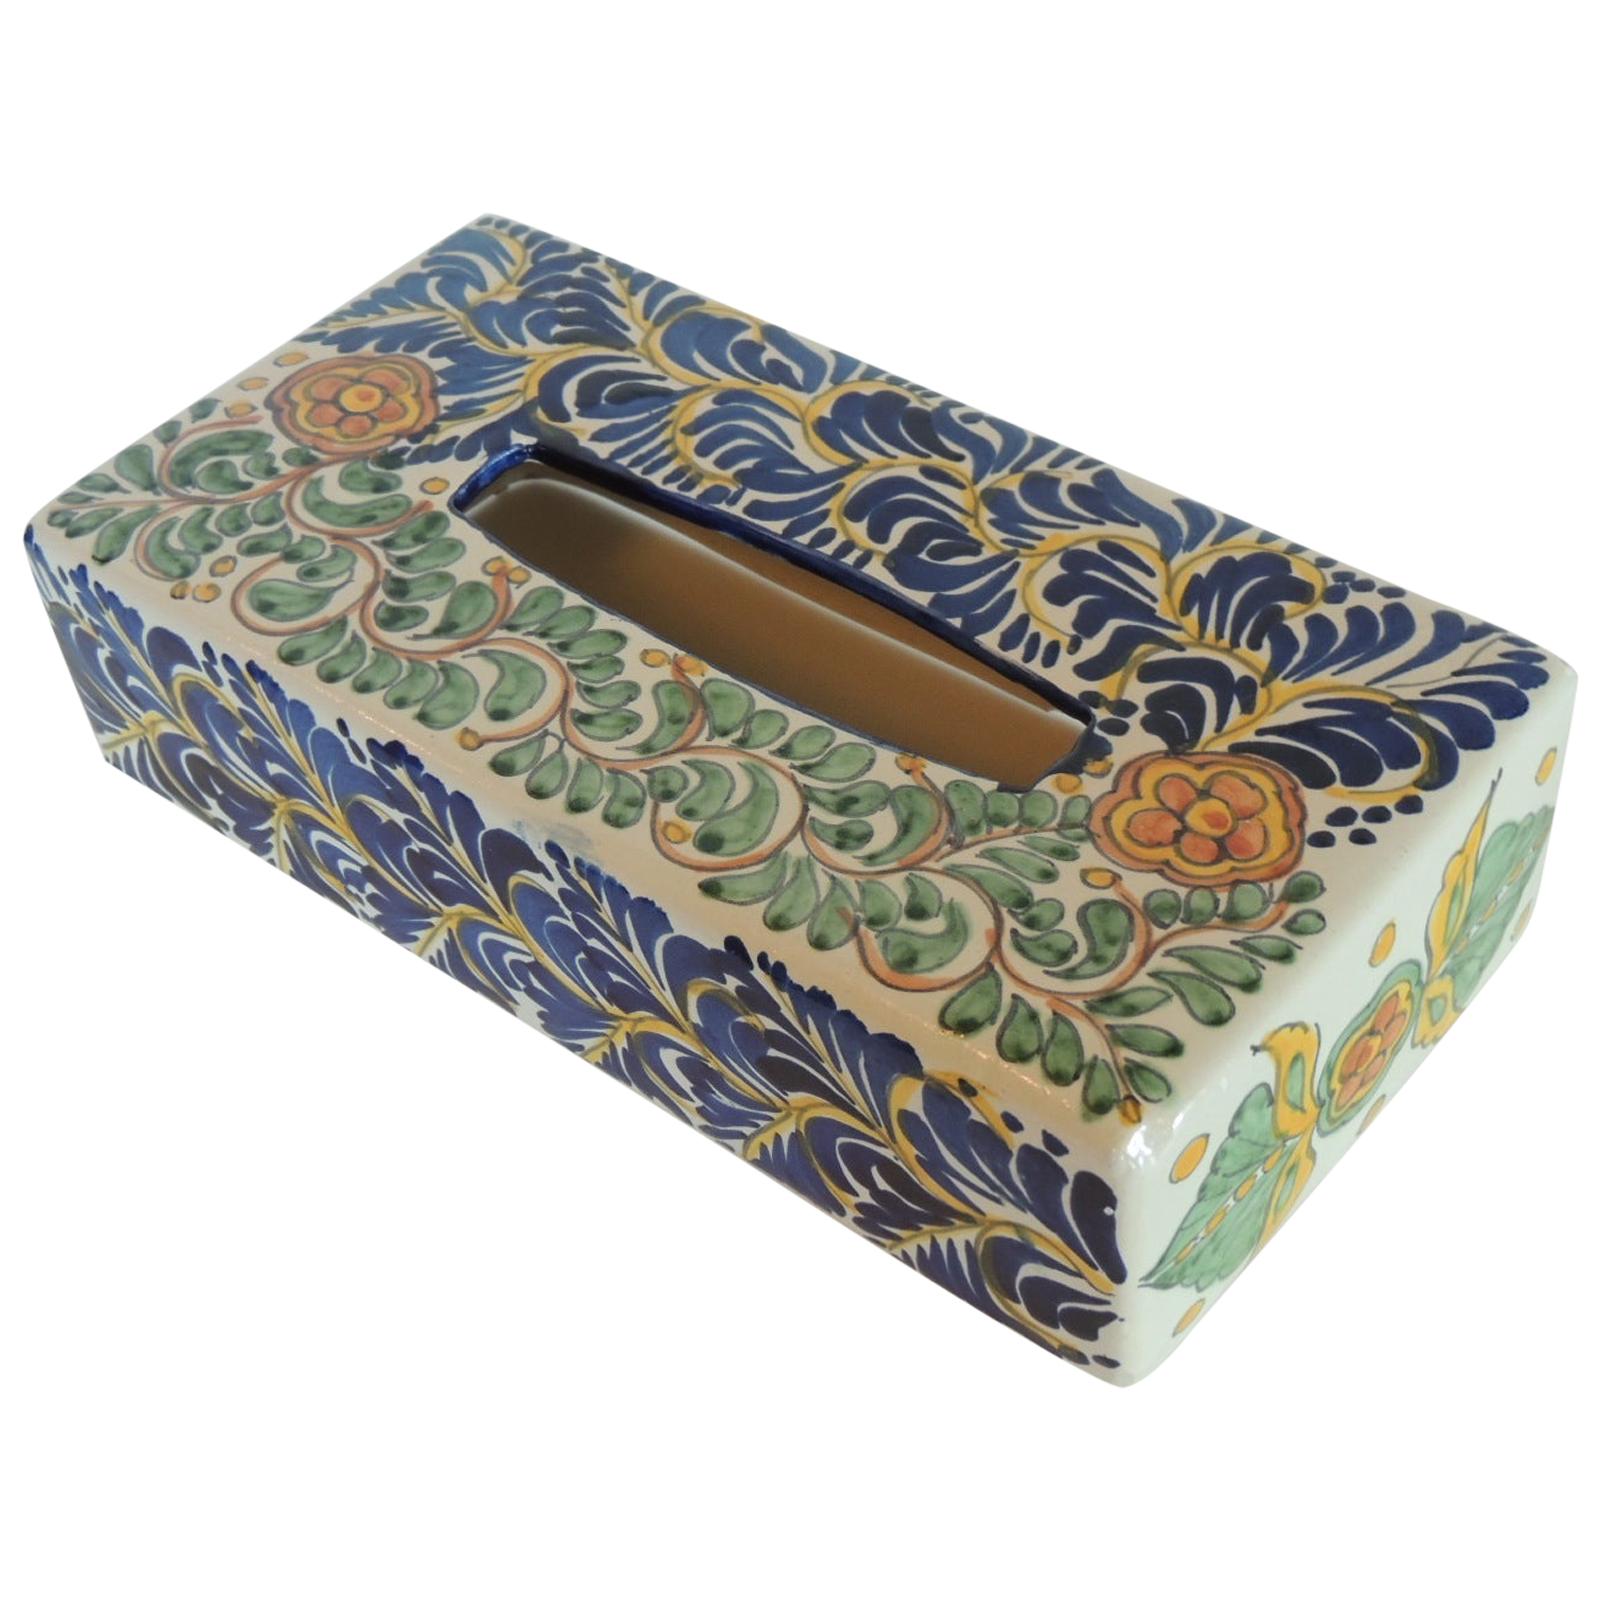 Retro Vintage Rectangle Antique Reproduction Colonial Style Tissue Box Cover 